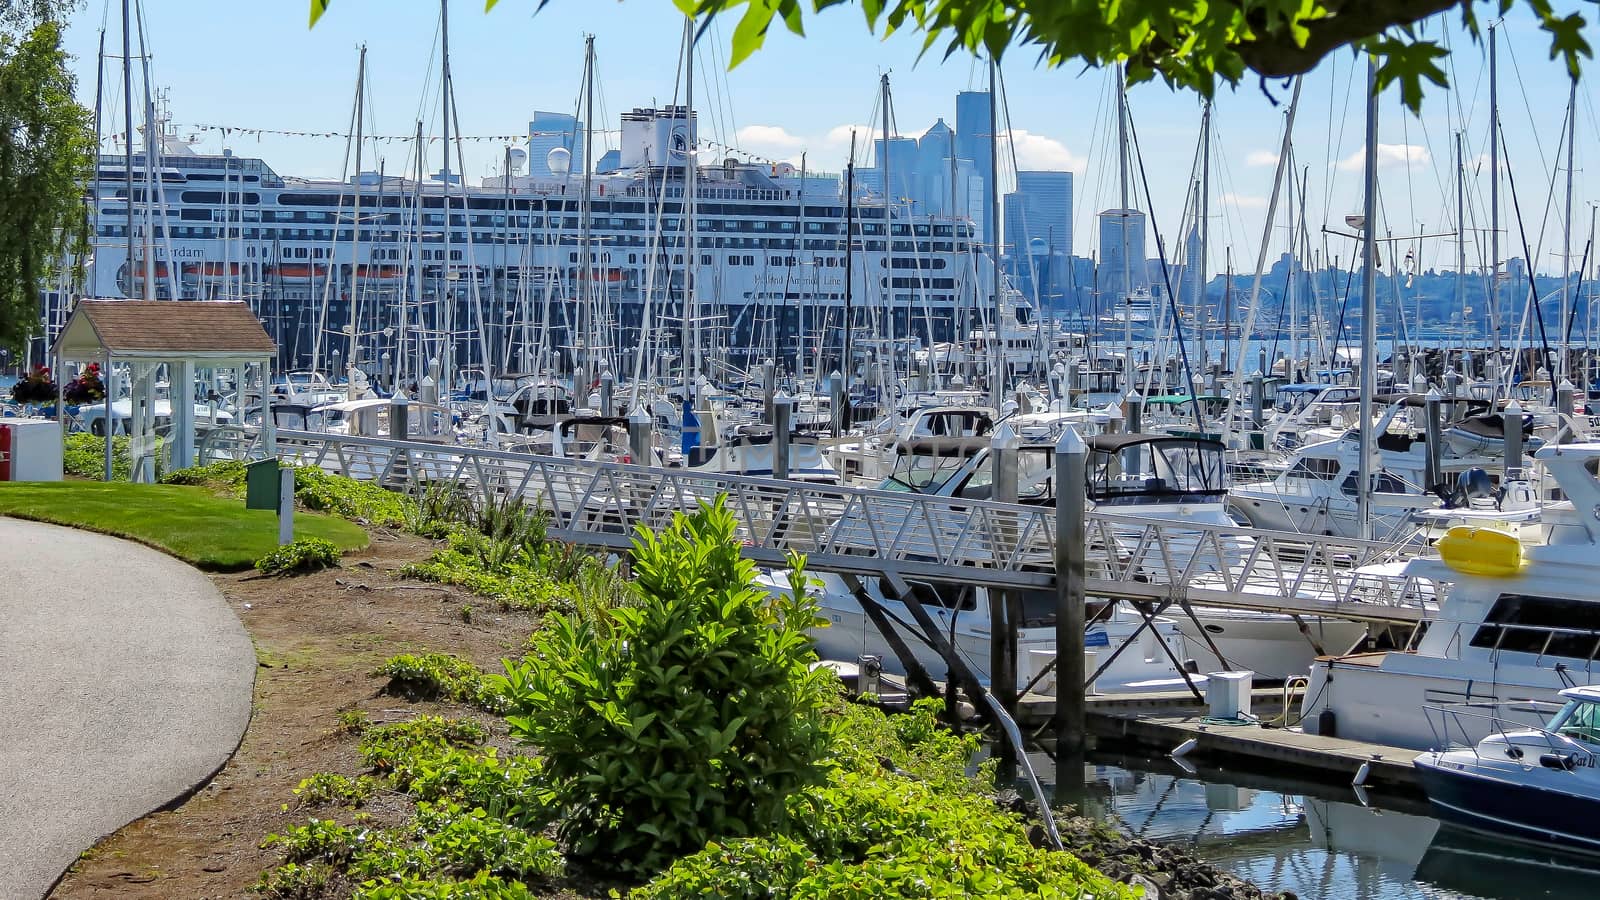 Seattle, Washington, USA- June 15, 2012: A large amount of private boats and yachts are moored in the harbor at Elliott Bay Marina in Seattle. The marina is inside Smith Cove.